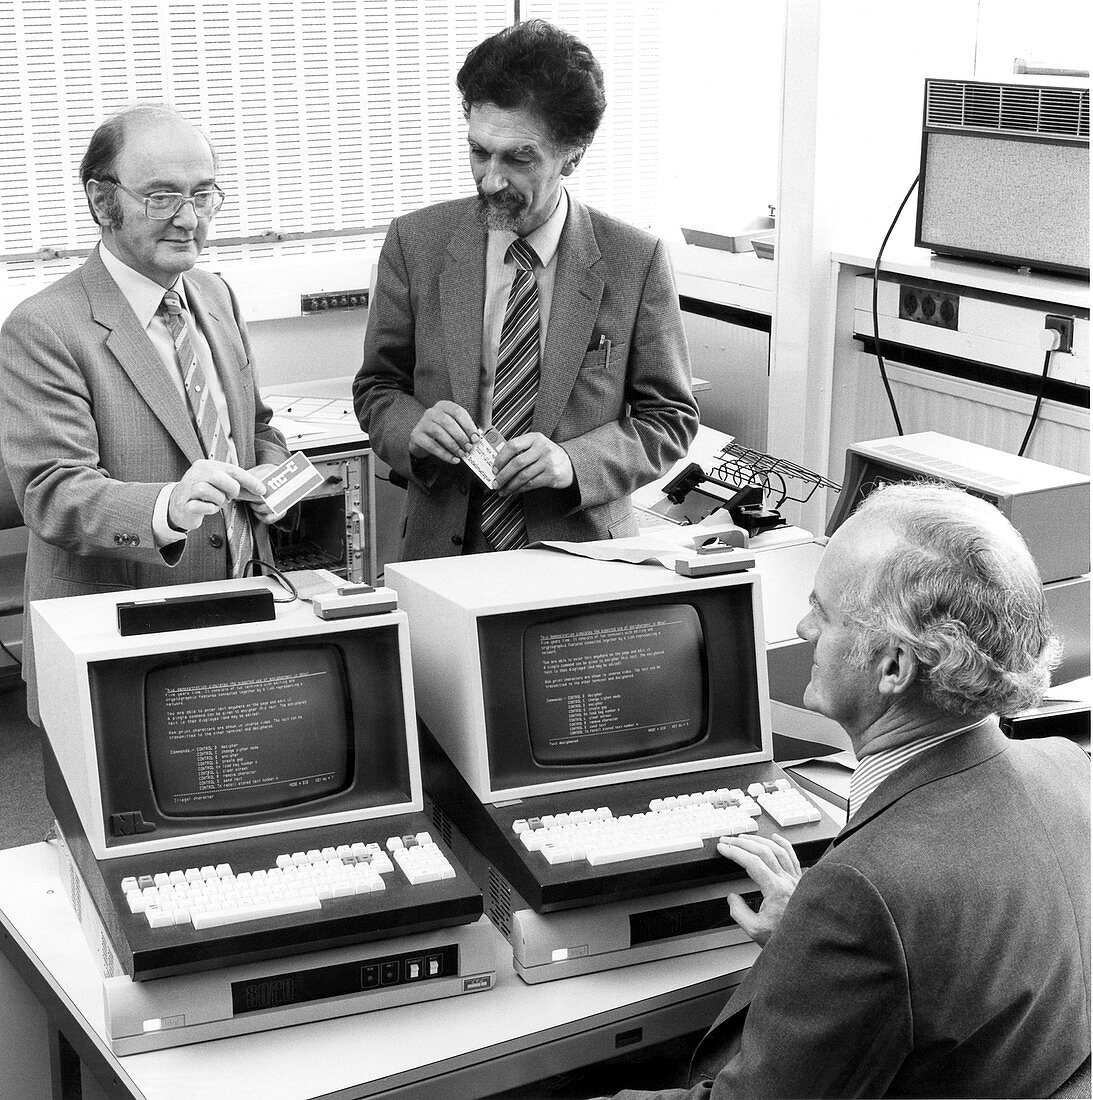 Smart card research,1982